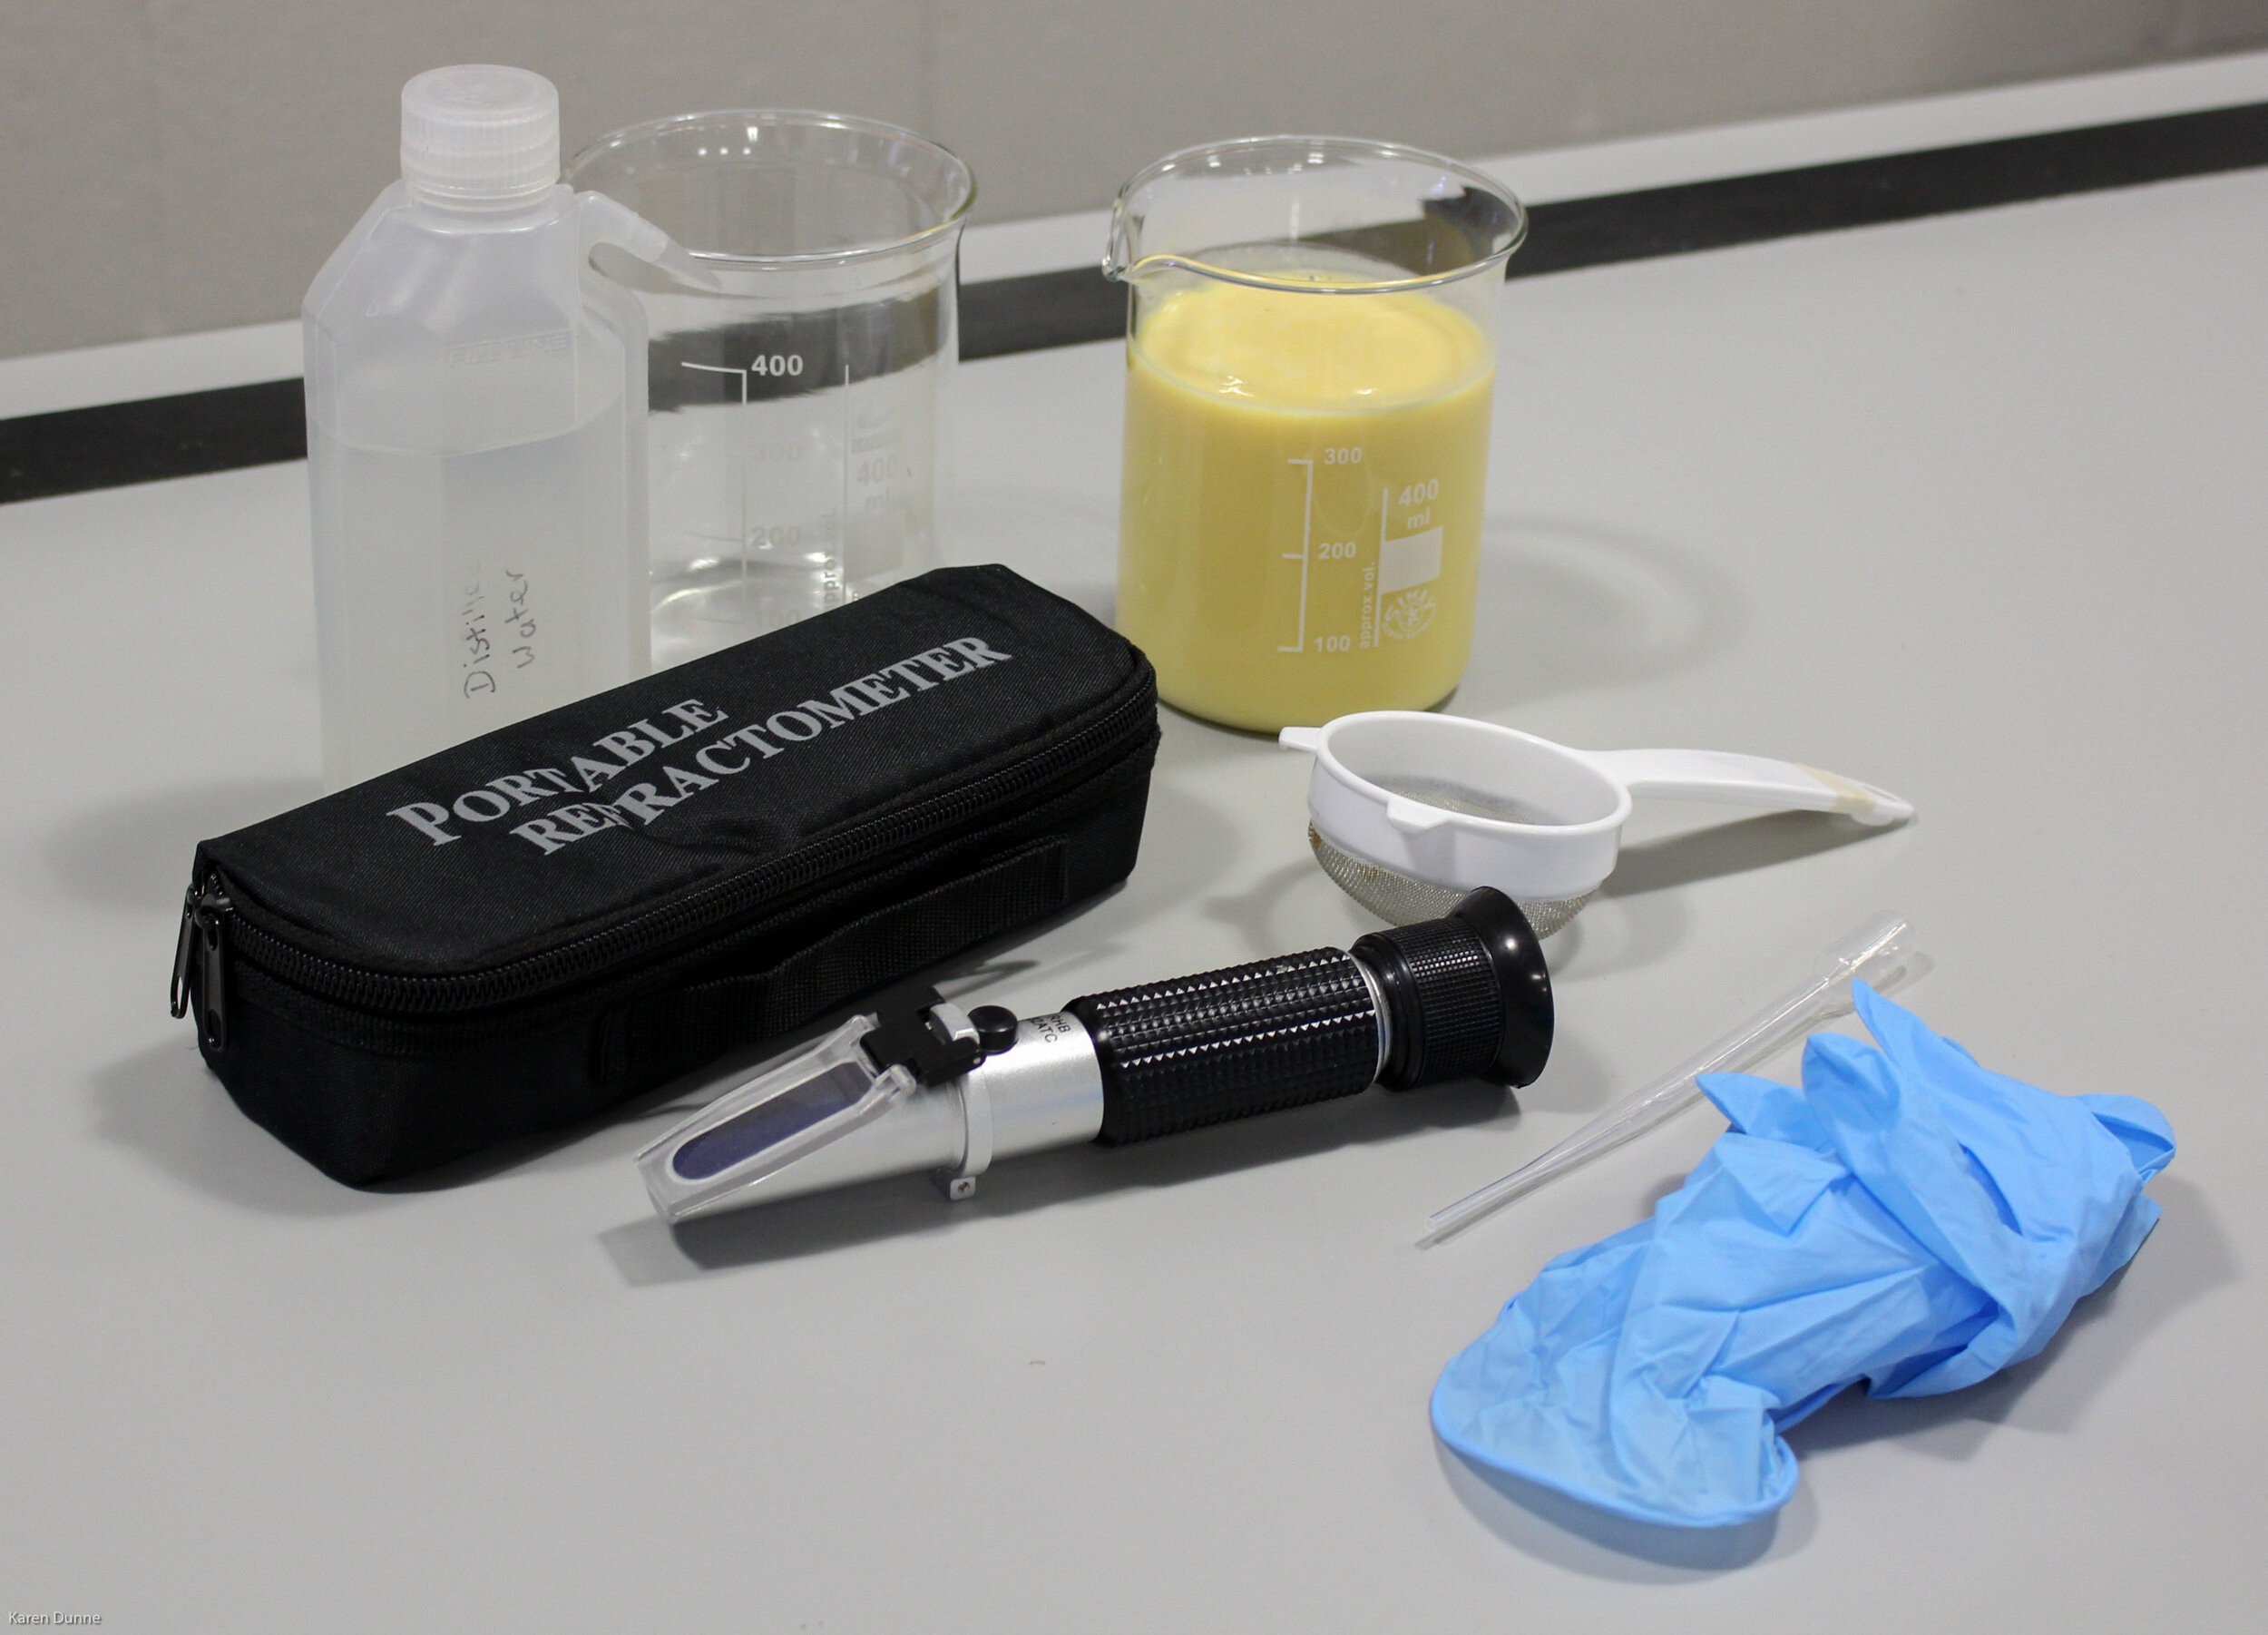  Equipment needed to assess colostrum quality with a Brix refractometer 